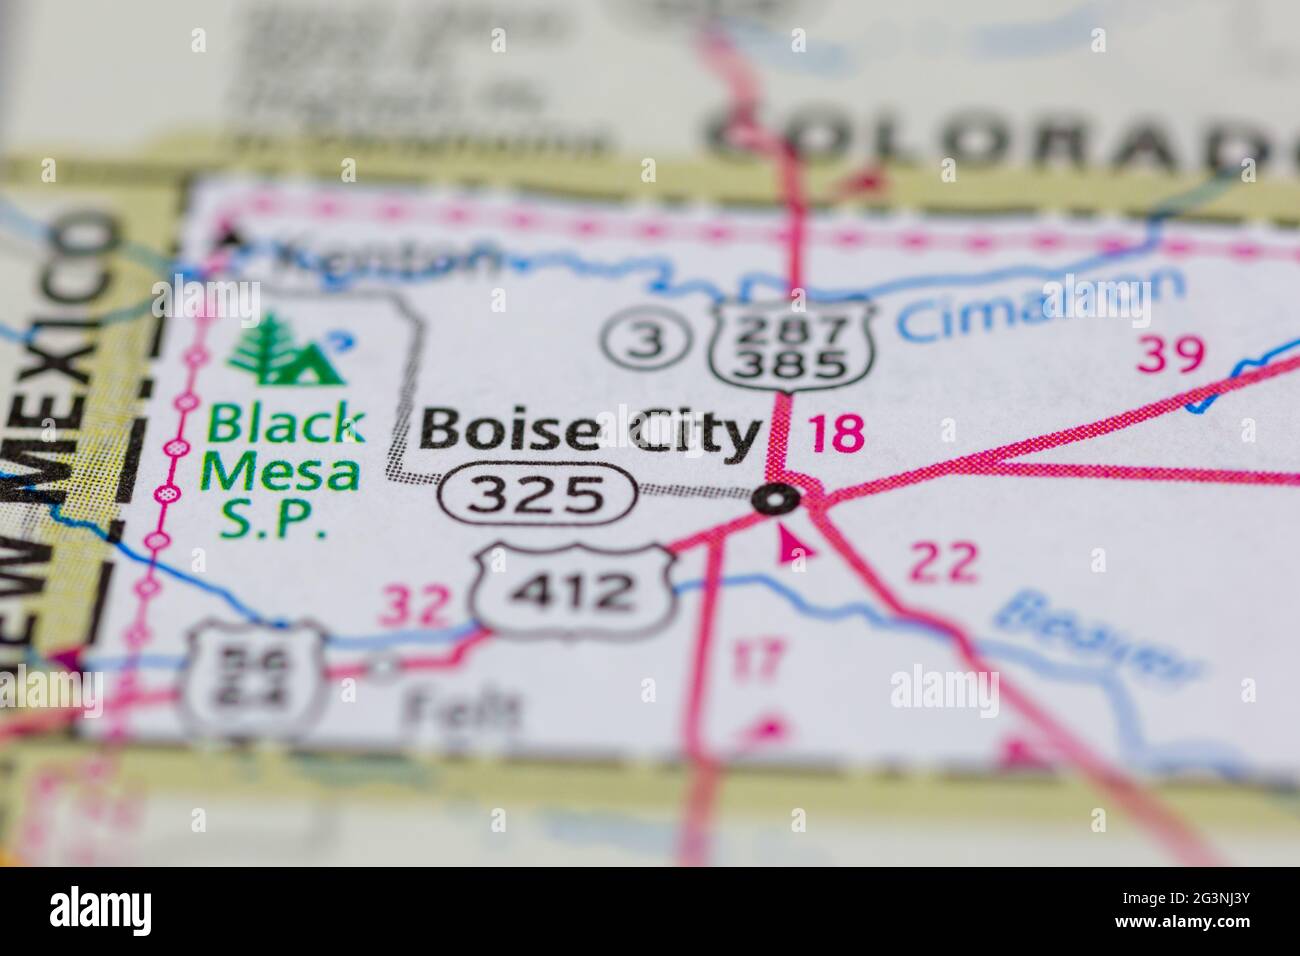 Boise city Oklahoma USA shown on a Geography map or road map Stock Photo